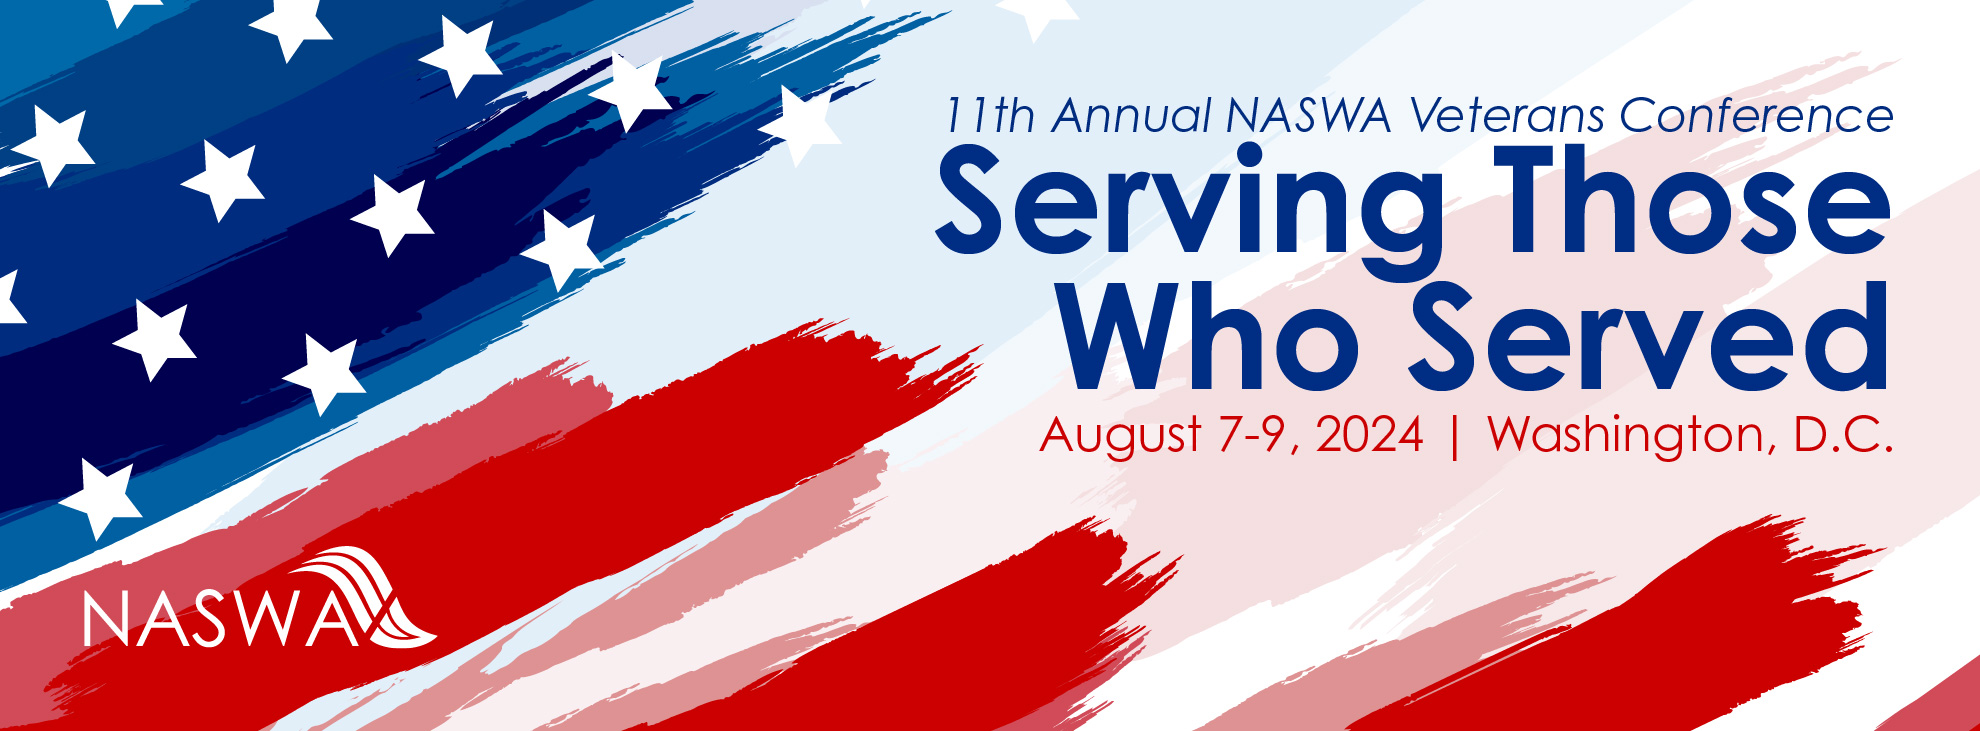 2024 Veterans Conference National Association of State Workforce Agencies